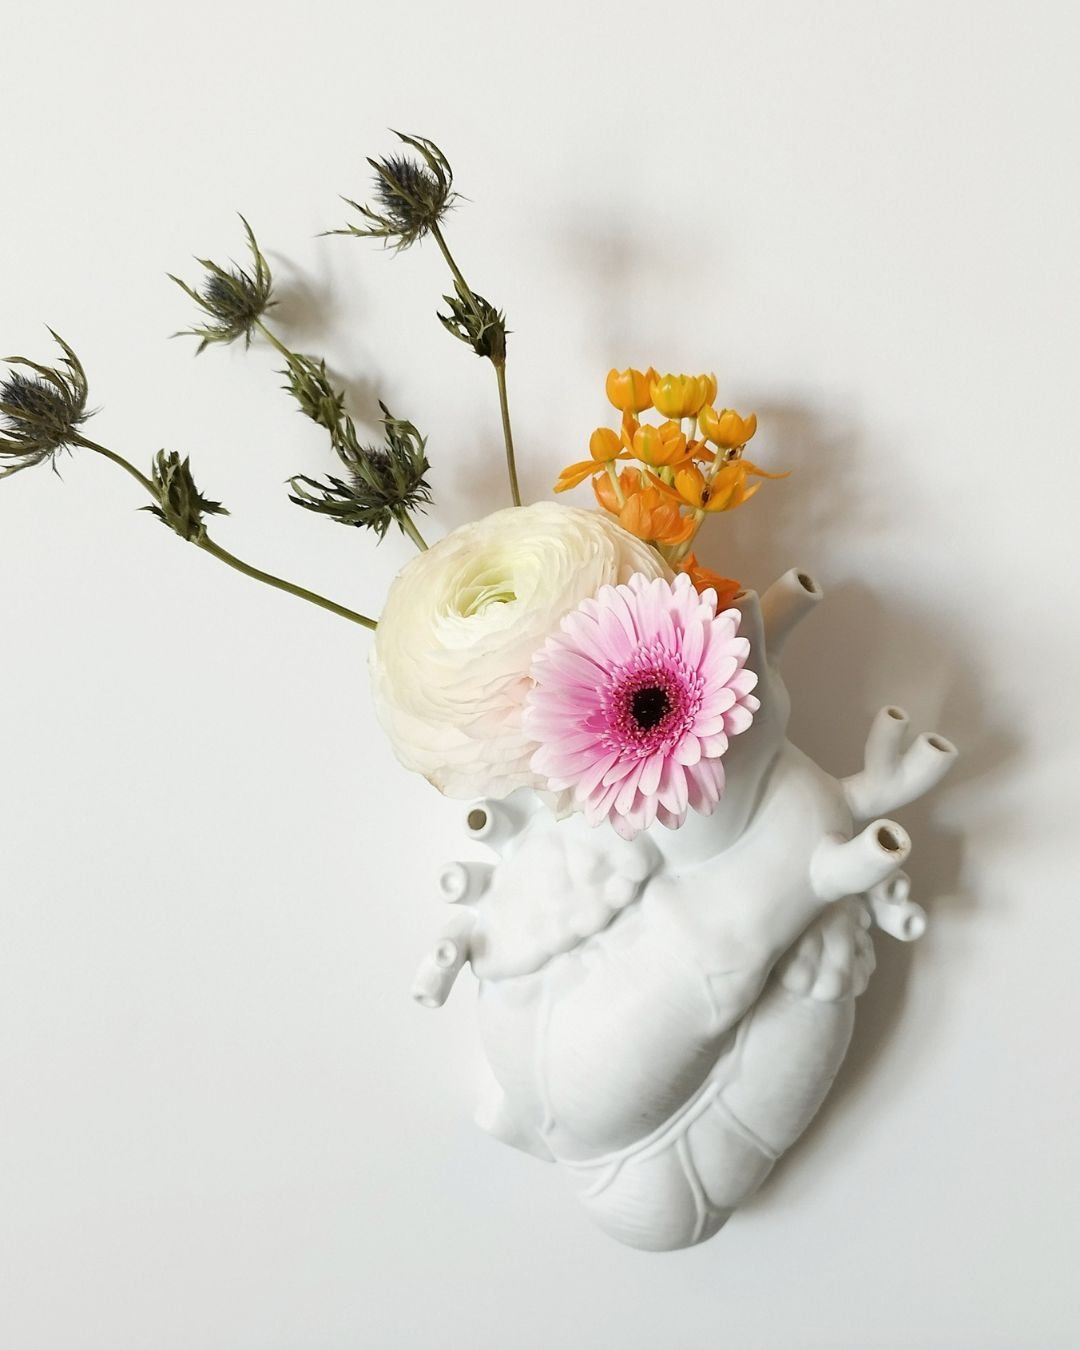 . I just wanted to remind you to bring some fresh flowers into your home and have some fun experimenting with different ways to display them. 

Do you buy yourself flowers?  Why not create a collection of your favorite vases and choose some flowers t